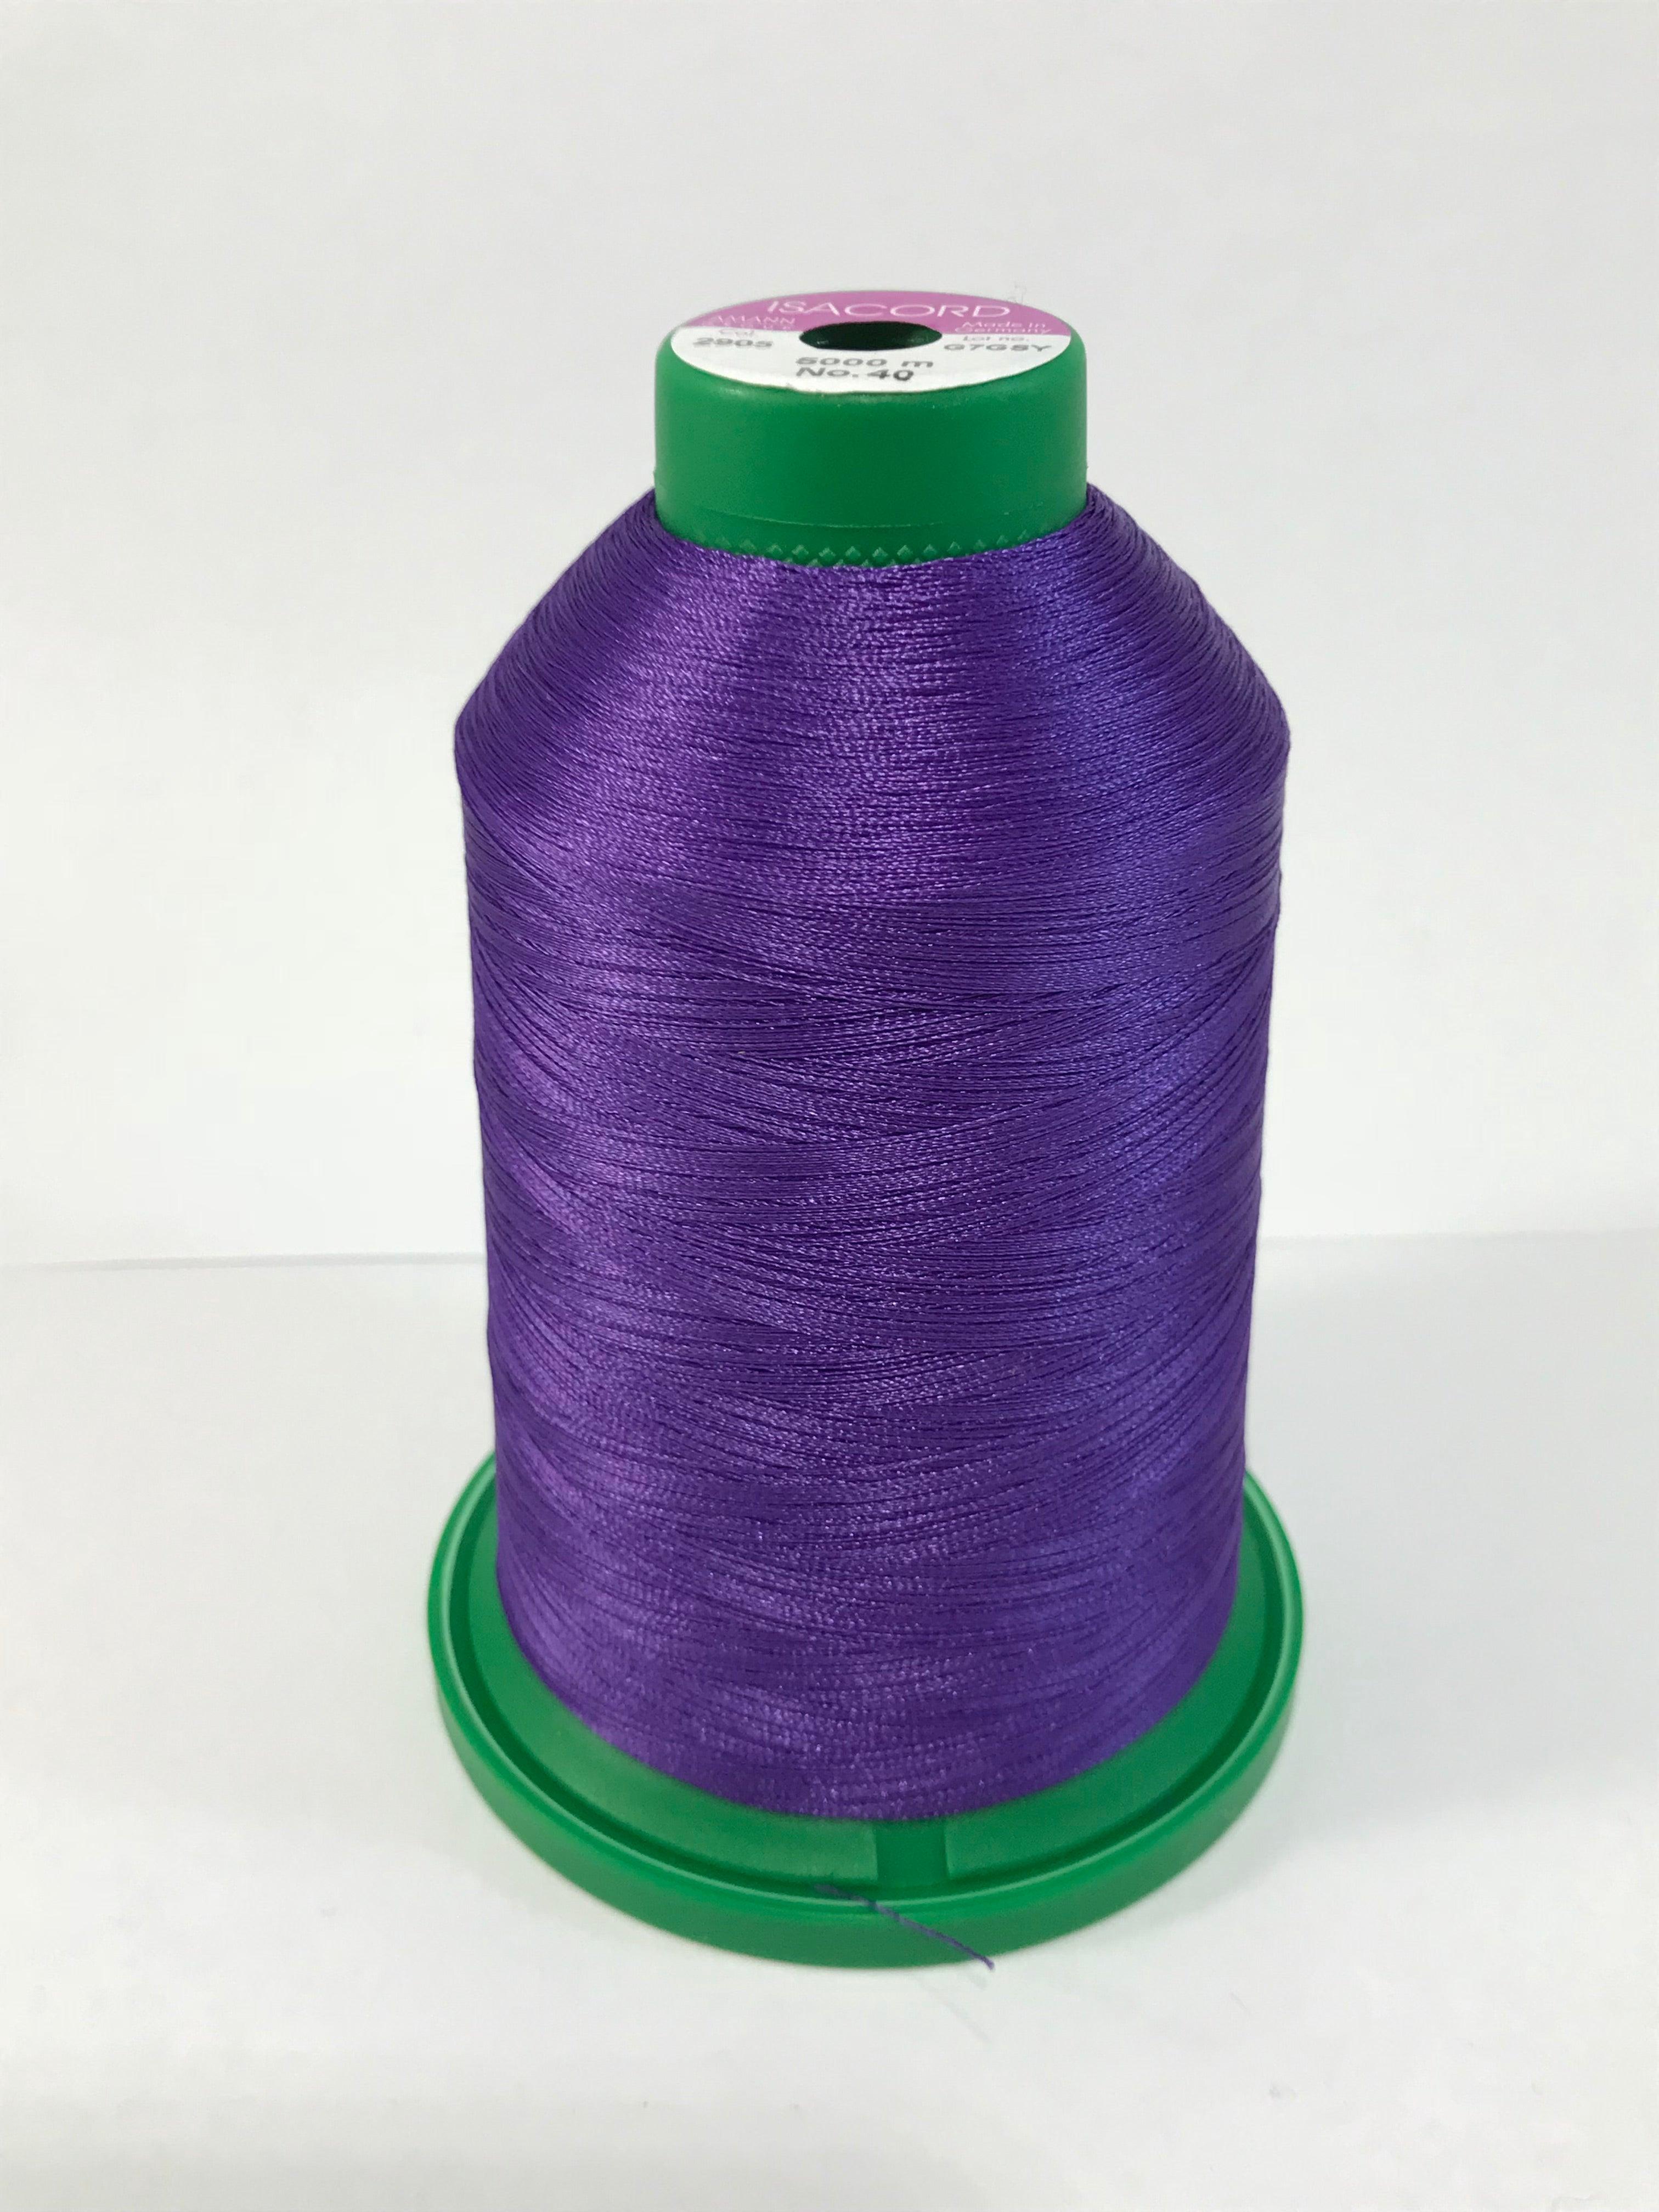 2905 - IRIS BLUE - ISACORD EMBROIDERY THREAD 40 WT